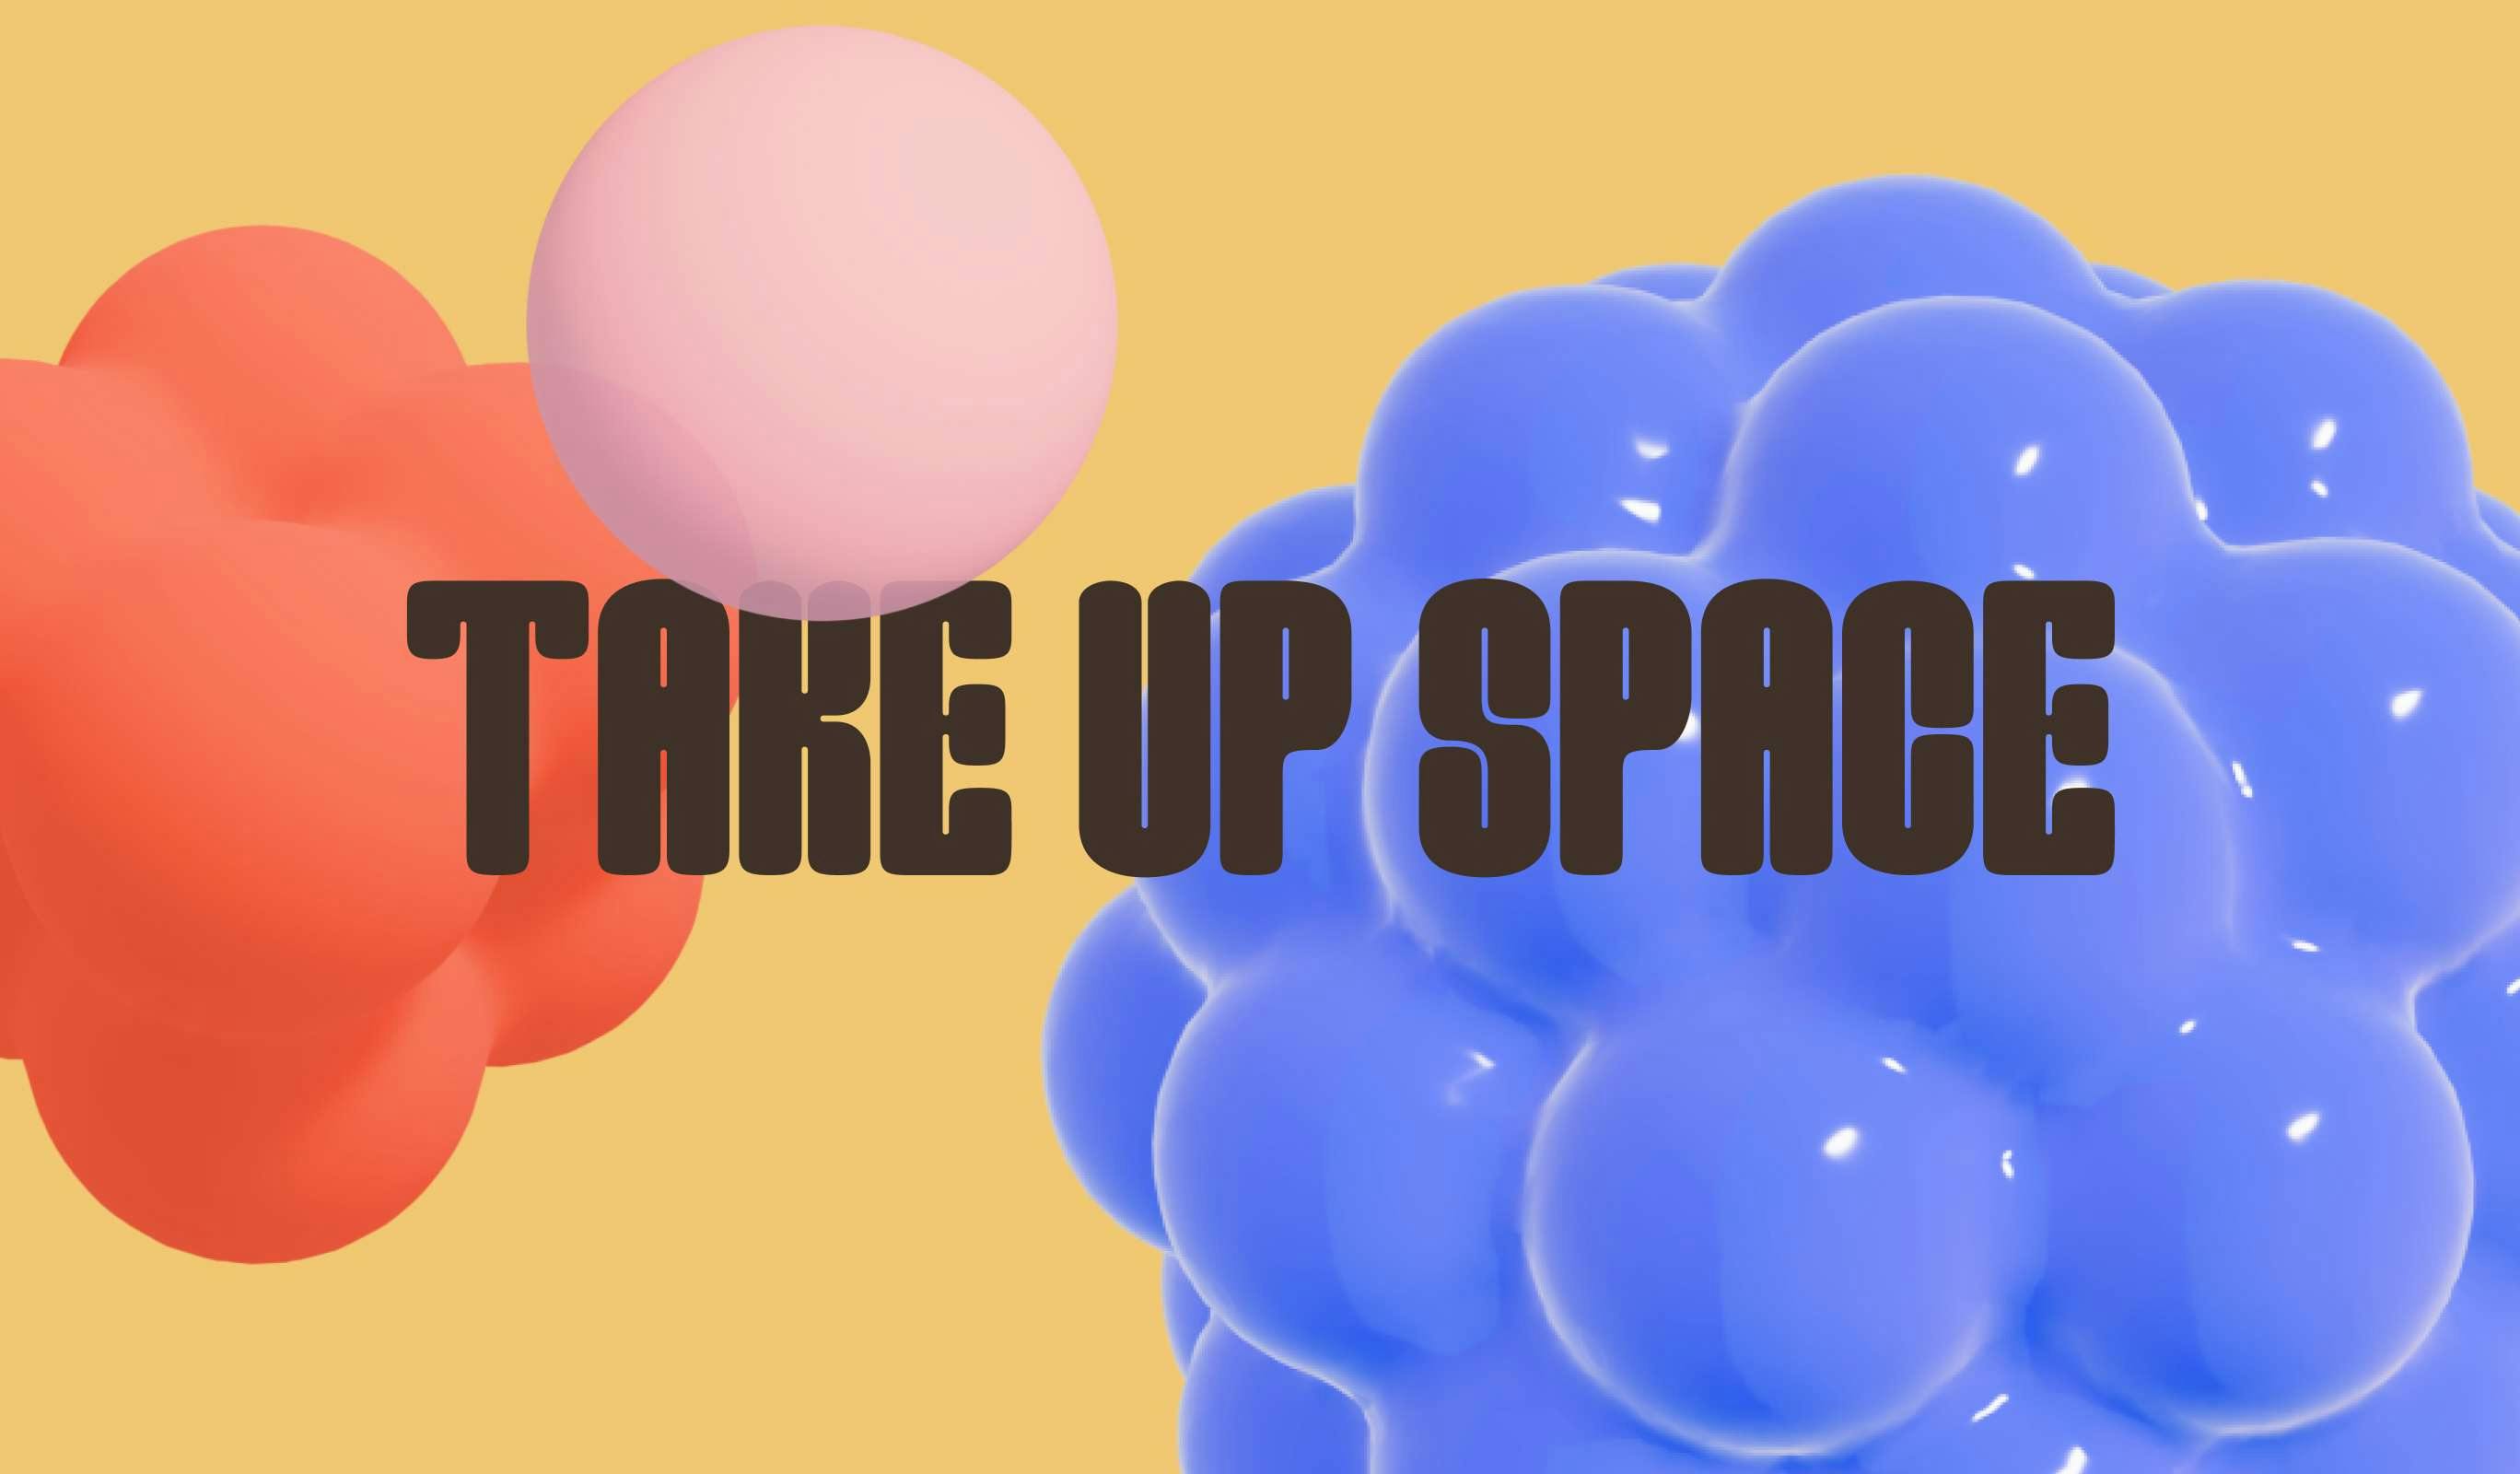 Bubbles with text says Take Up Space